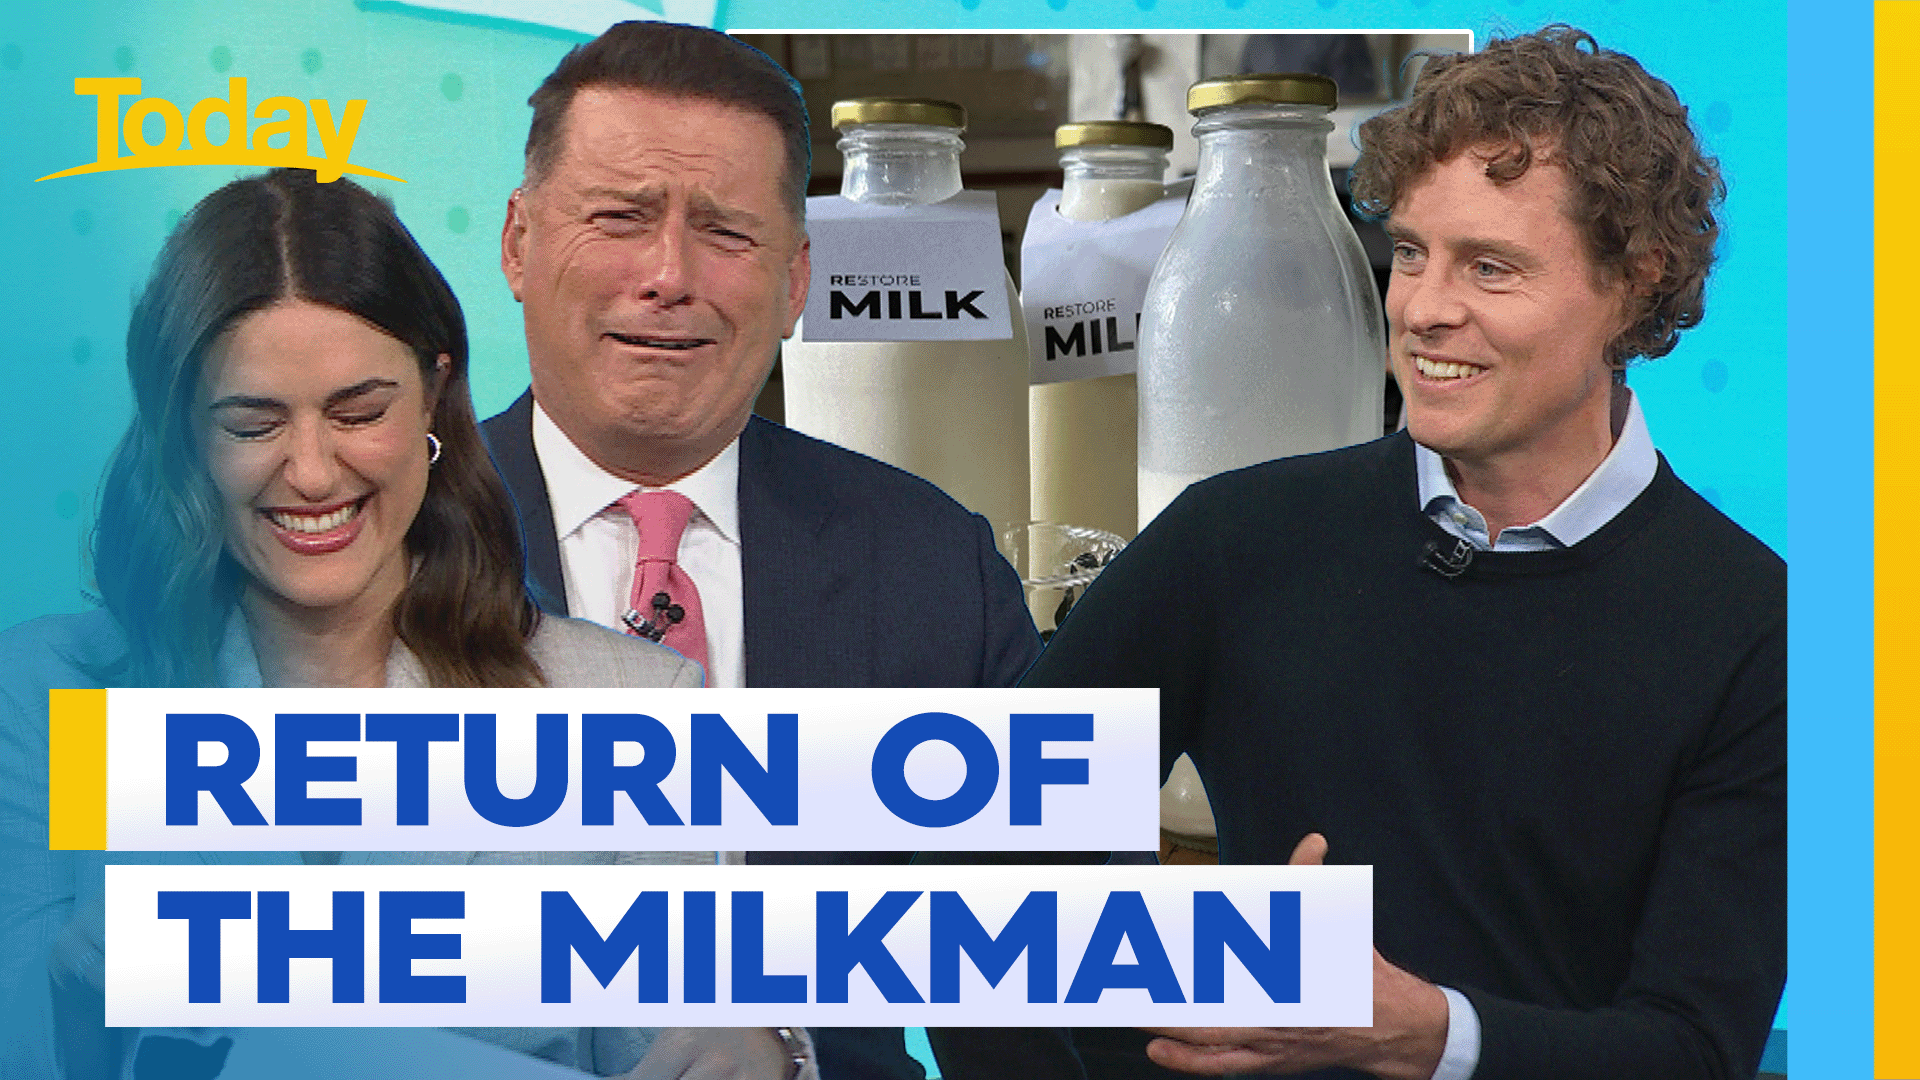 Meet the Aussie determined to bring back traditional milk delivery